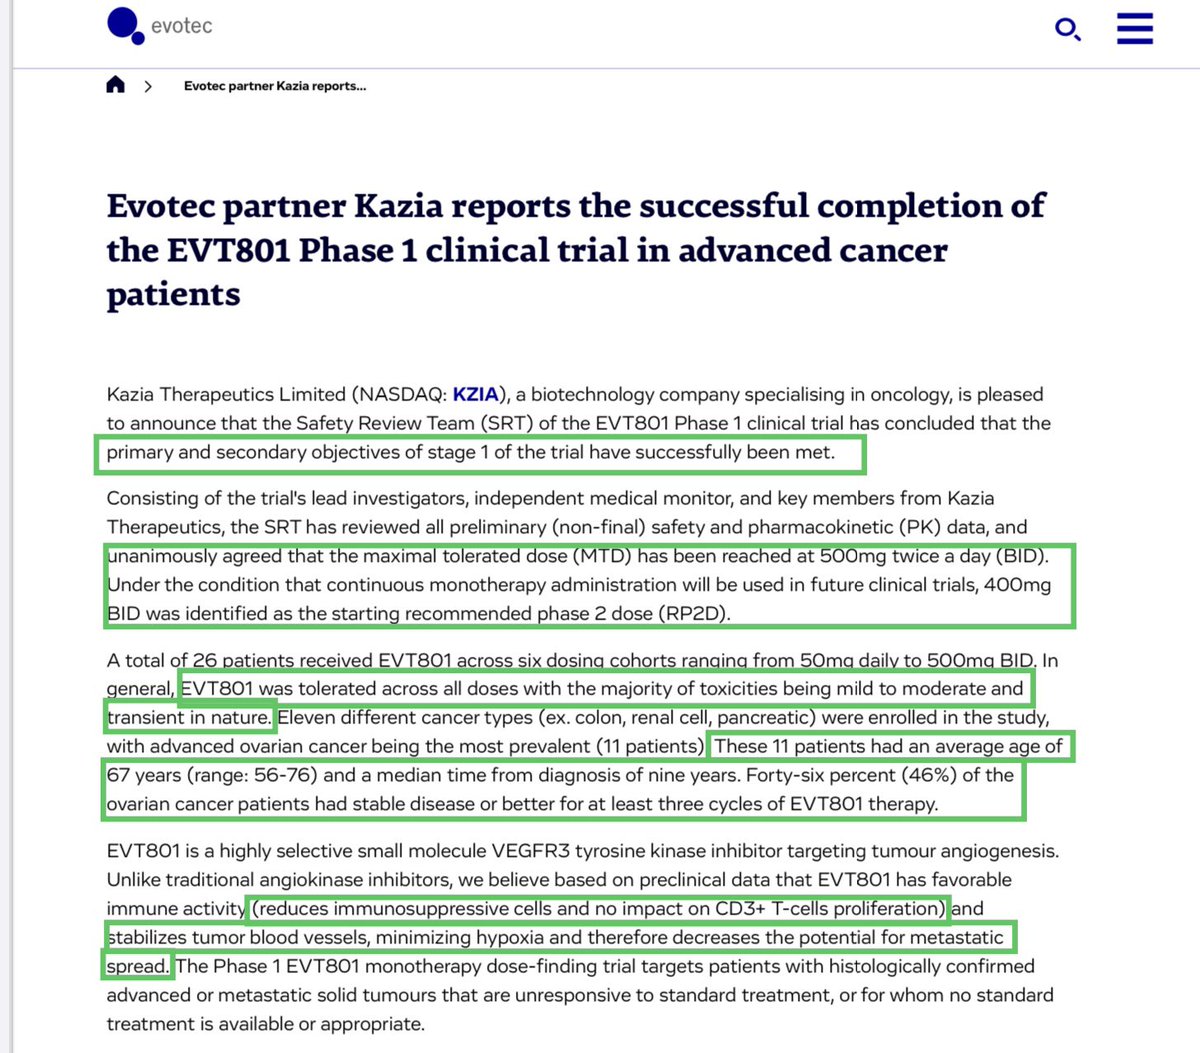 $EVT.DE @evotec $KZIA
#EVT801 Phase 1 clinical trial results. 
In general, EVT801 was tolerated across all doses with the majority of toxicities being mild to moderate. Primary and secondary objectives of stage 1 of the trial have successfully been met. kaziatherapeutics.com/site/pdf/4489c…